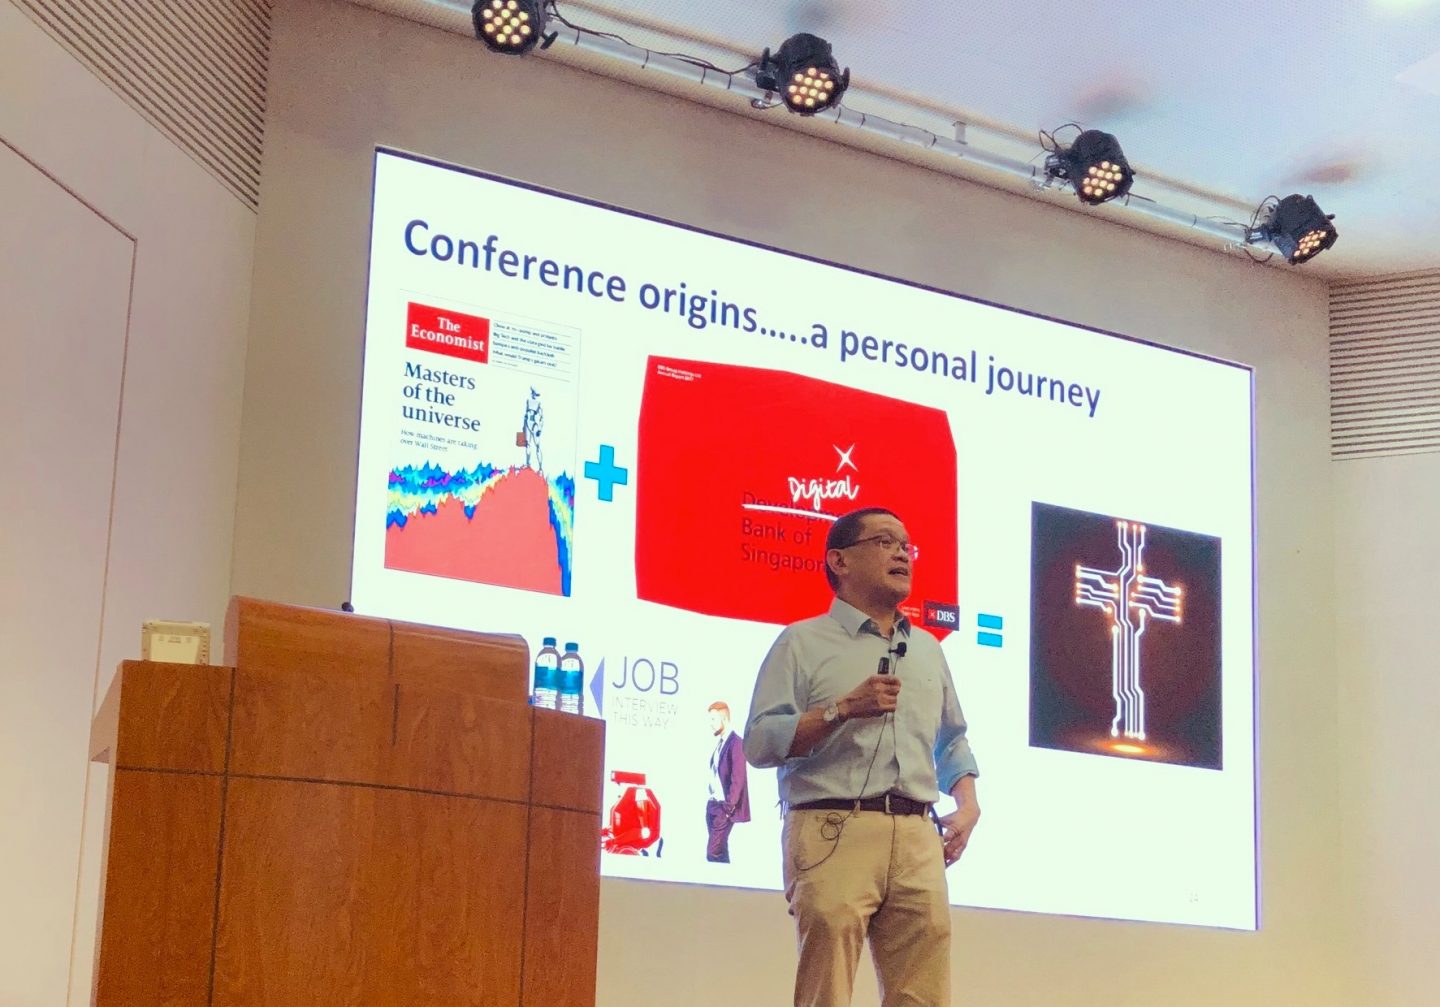 Khoo Teng Cheong, one of the conference organisers, spoke about how the conference had been birthed out of a personal journey after reflecting on his career in banking. Photo by Bible Graduate School of Technology.